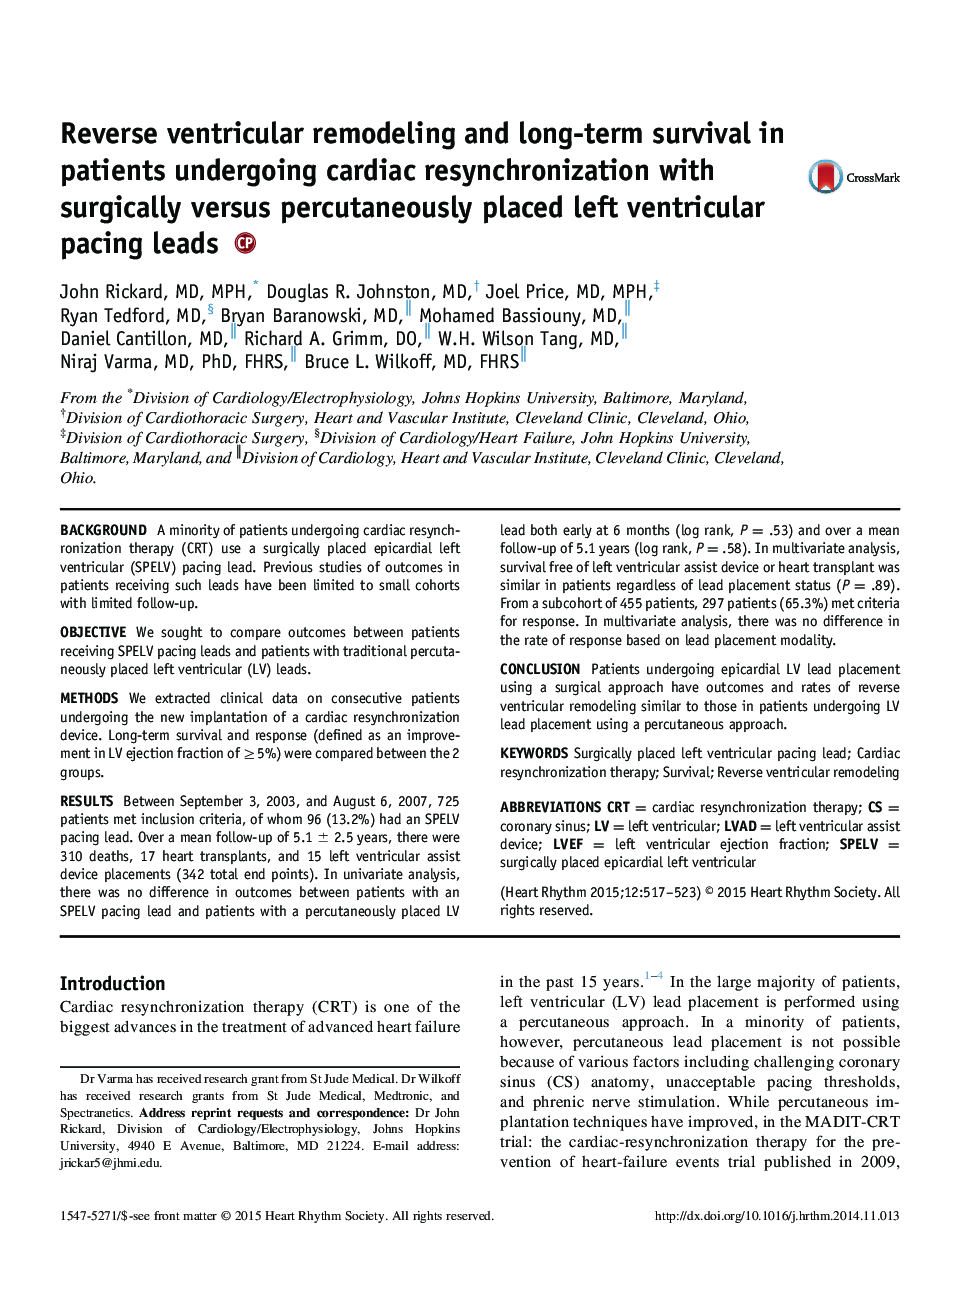 Reverse ventricular remodeling and long-term survival in patients undergoing cardiac resynchronization with surgically versus percutaneously placed left ventricular pacing leads 